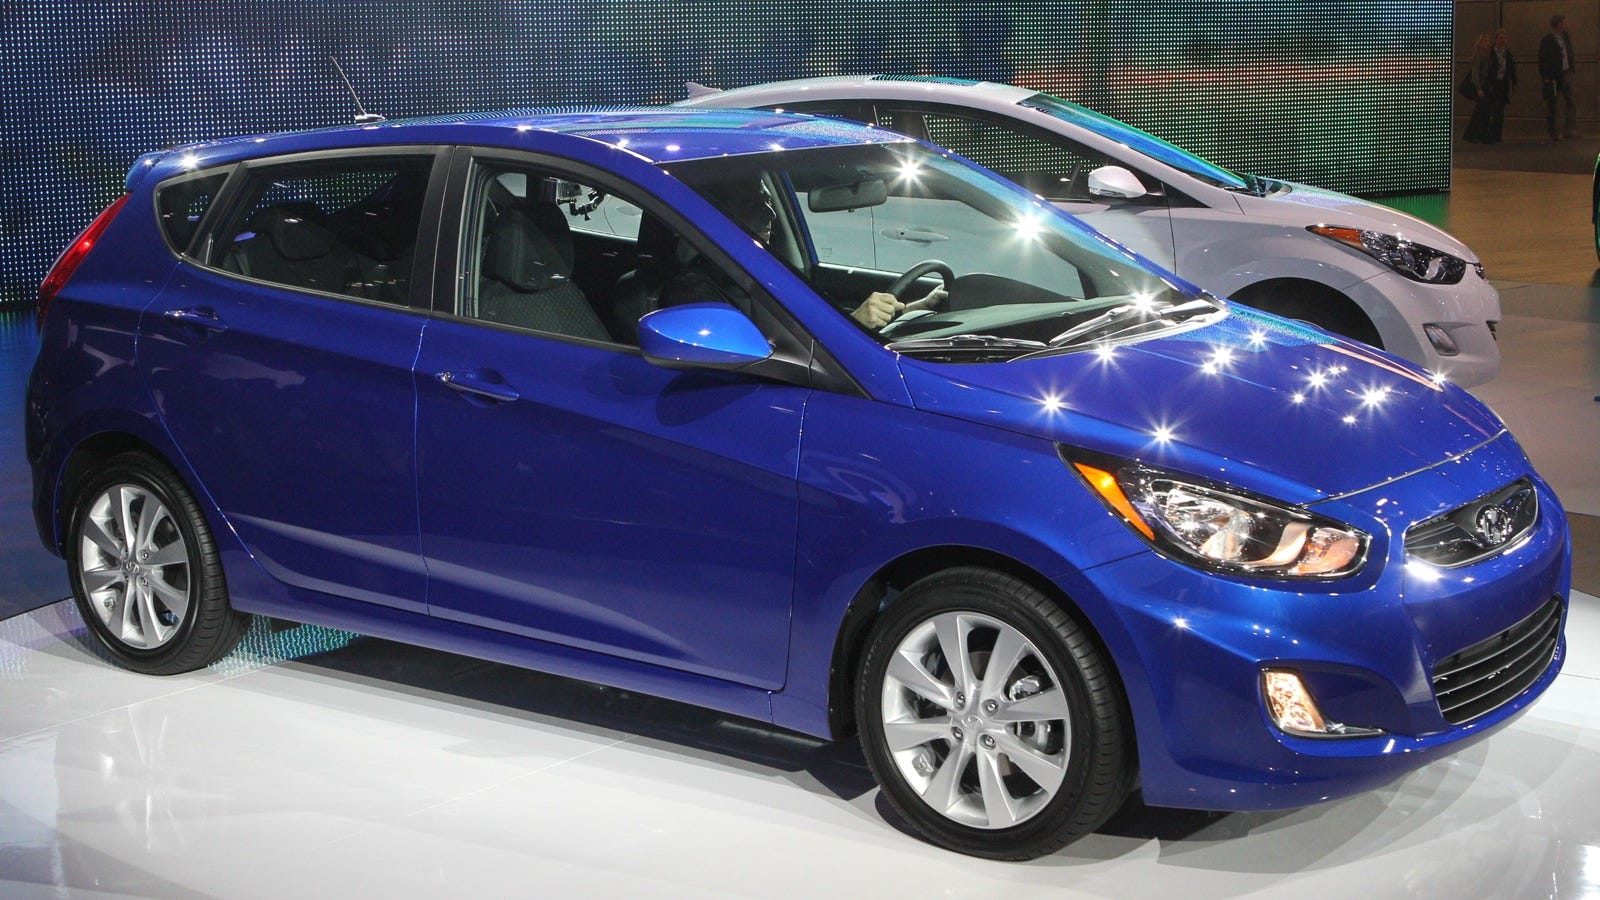 2012 Hyundai Accent is here to give Honda the Fits